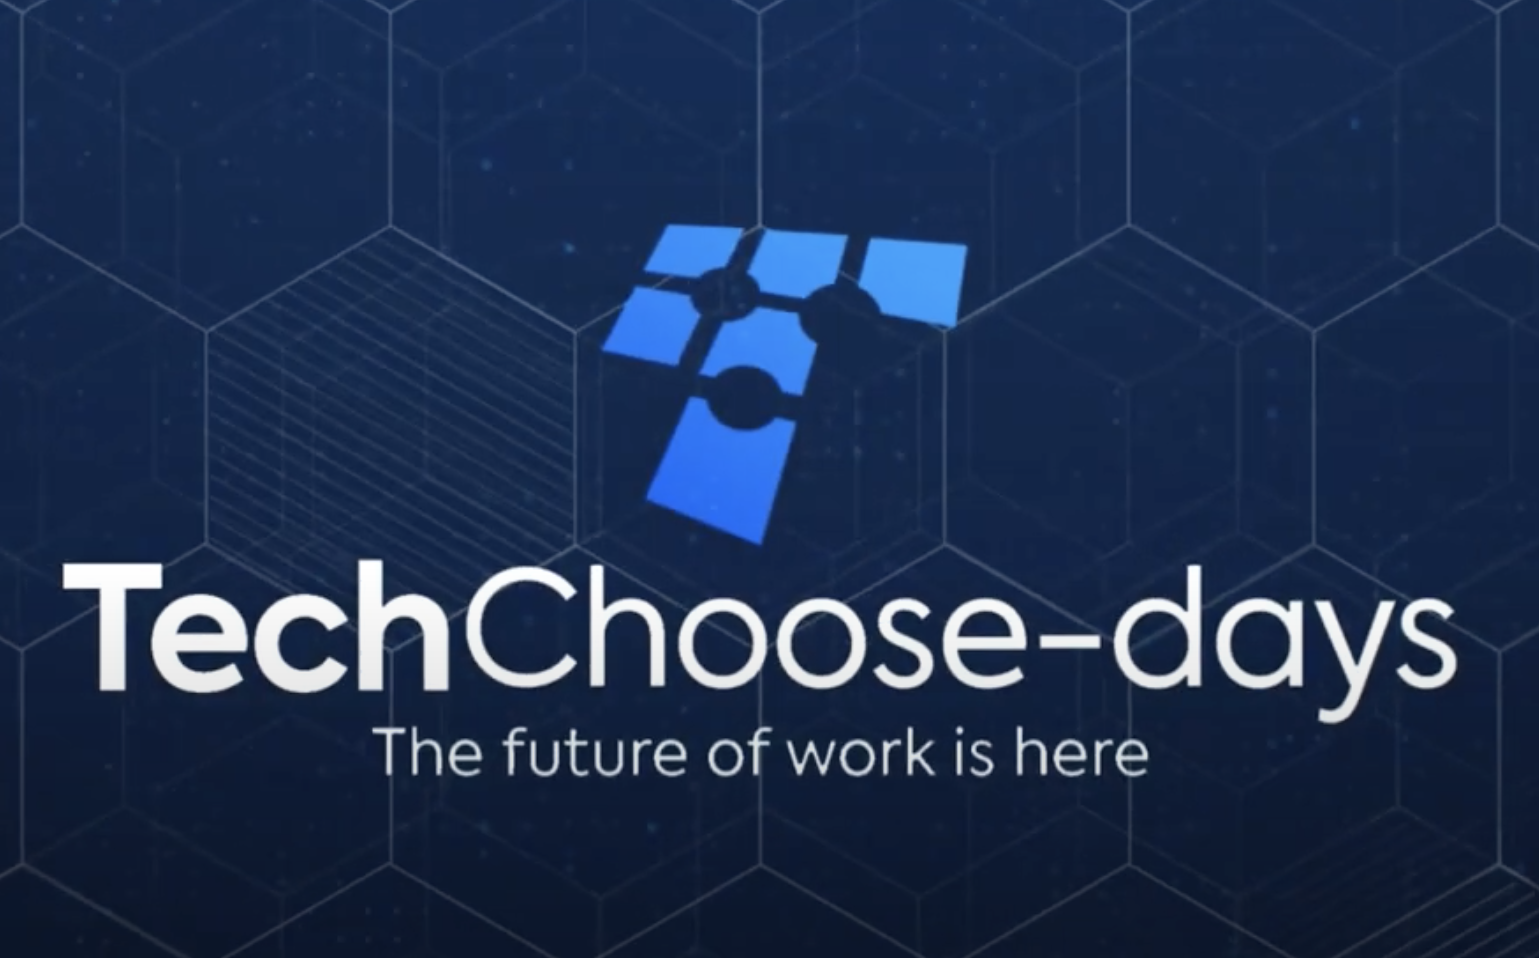 techchoose-days the future of work is here banner